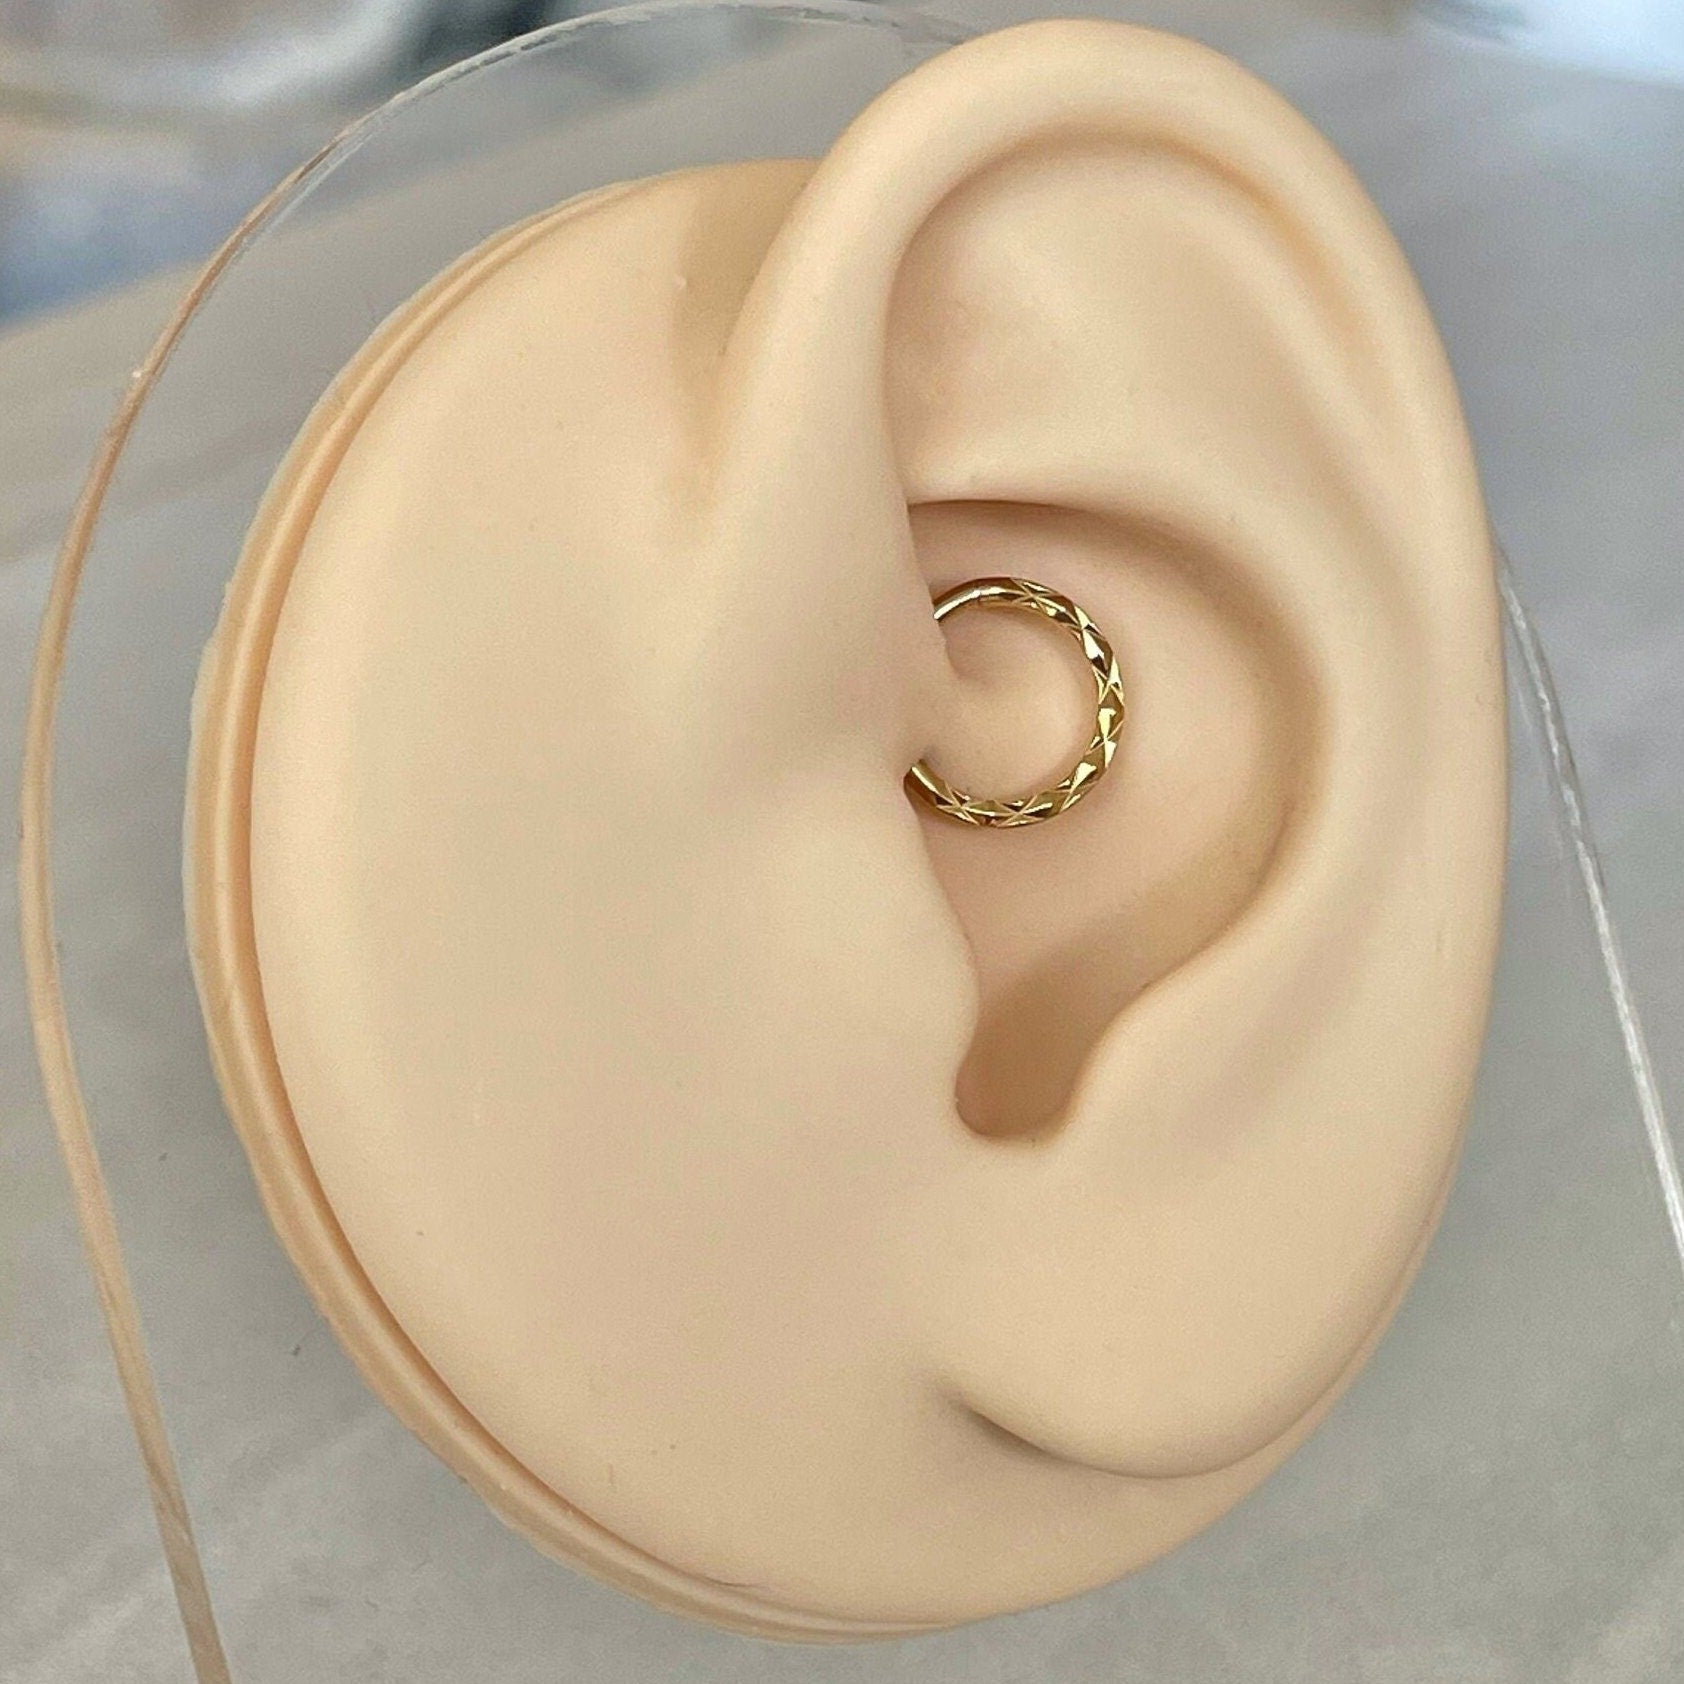 Gold Daith Earring (16G | 6mm, 8mm or 10mm | Surgical Steel | Black, Gold, or Silver | 